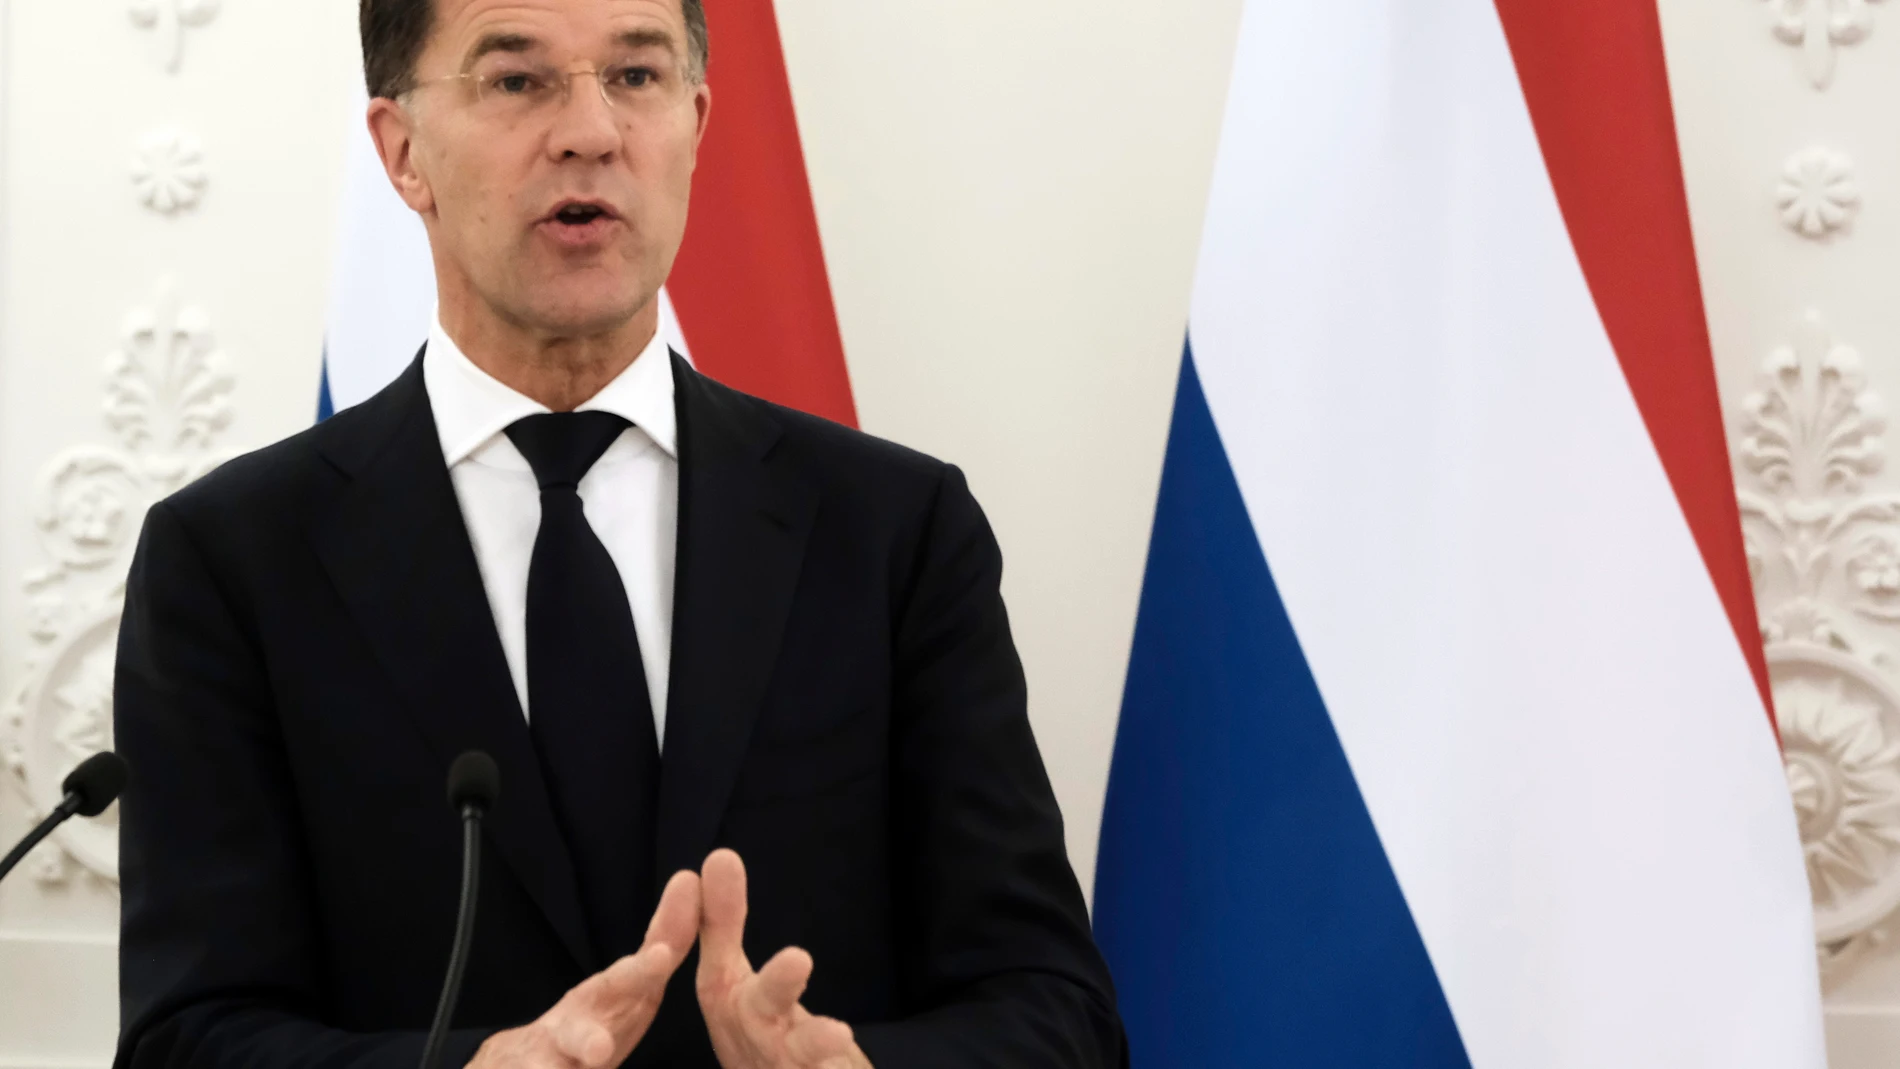 Vilnius (Lithuania), 02/04/2024.- Dutch Prime Minister Mark Rutte attends a press conference after his meeting with the Lithuanian president in Vilnius, Lithuania, 02 April 2024. The Lithuanian president and the Dutch prime minister during the meeting discussed defense and security, the strengthening of NATOvïs eastern flank, support for Ukraine, and current EU issues. (Lituania, Países Bajos; Holanda, Ucrania) EFE/EPA/VALDA KALNINA 